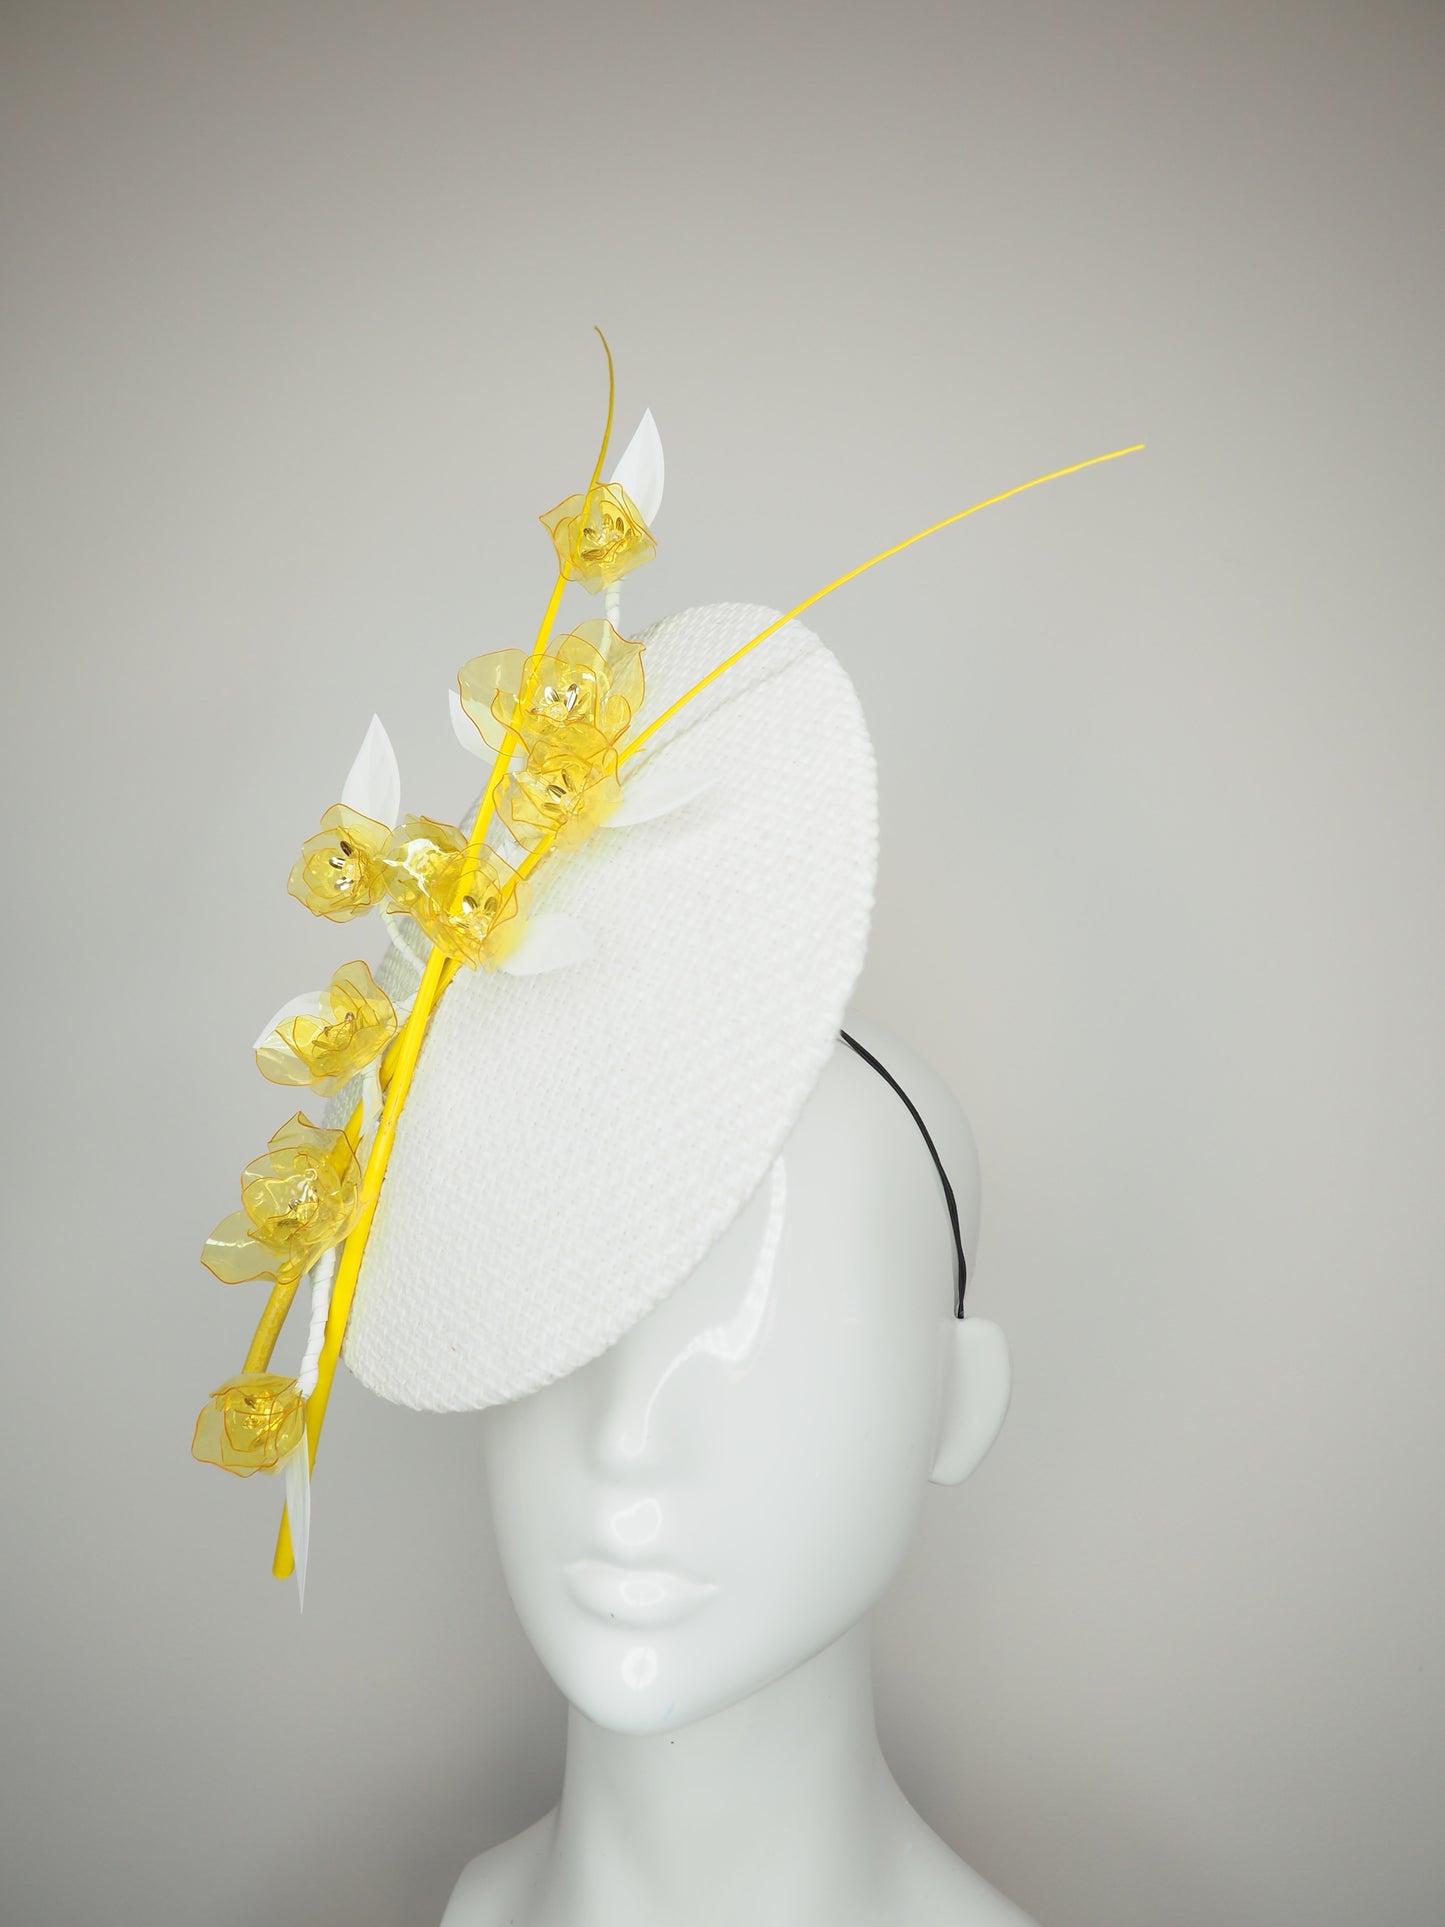 Snow buttercup - White raffia disc with golden yellow crystoform buttercups